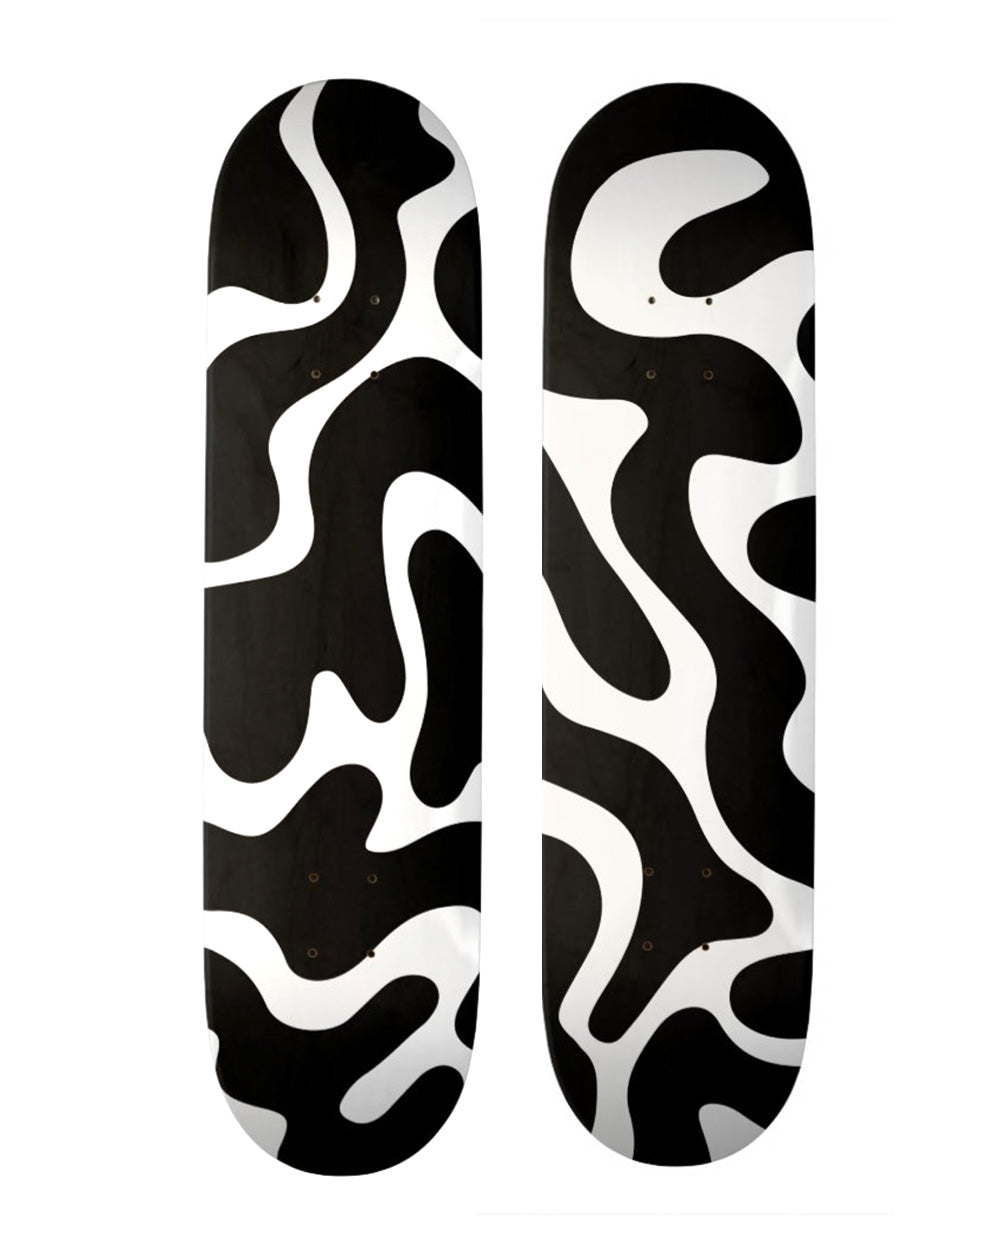 Abstract Shapes Skateboard Deck